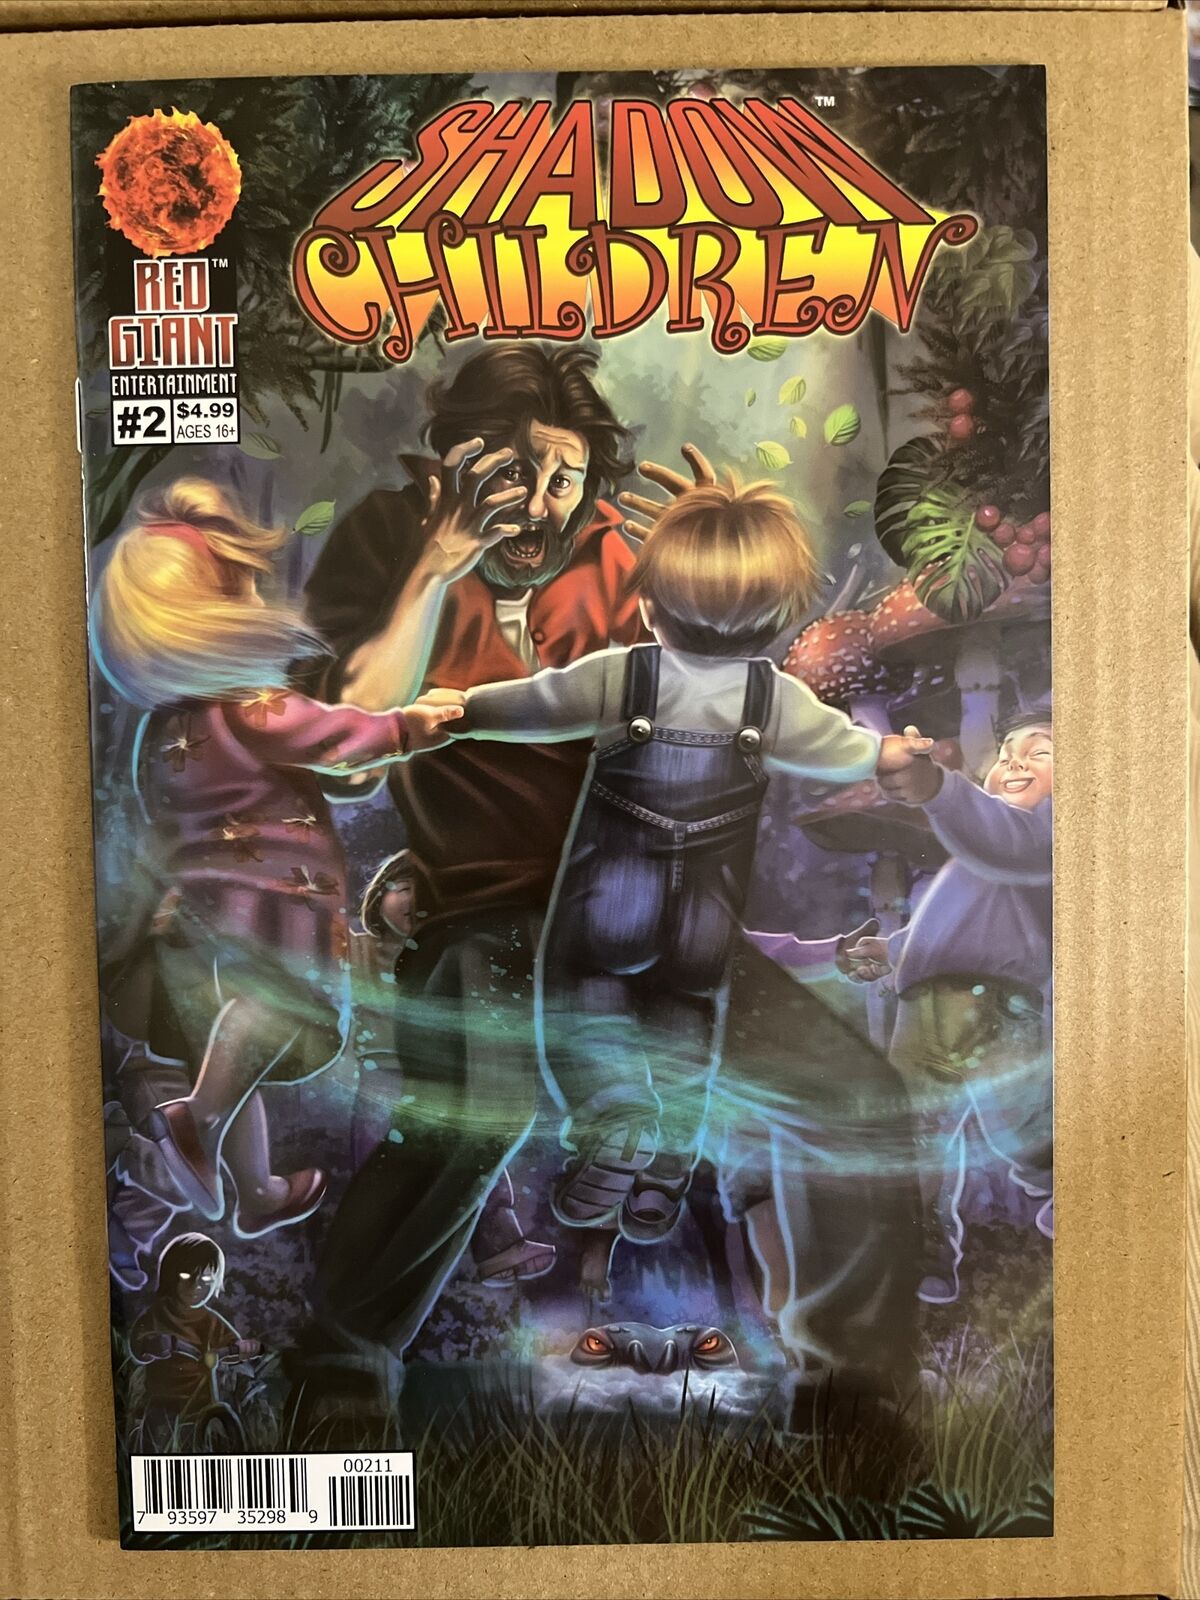 Shadow Children #2 | VF+ 1st Print | 2021 Red Giant Comics | Combine Shipping